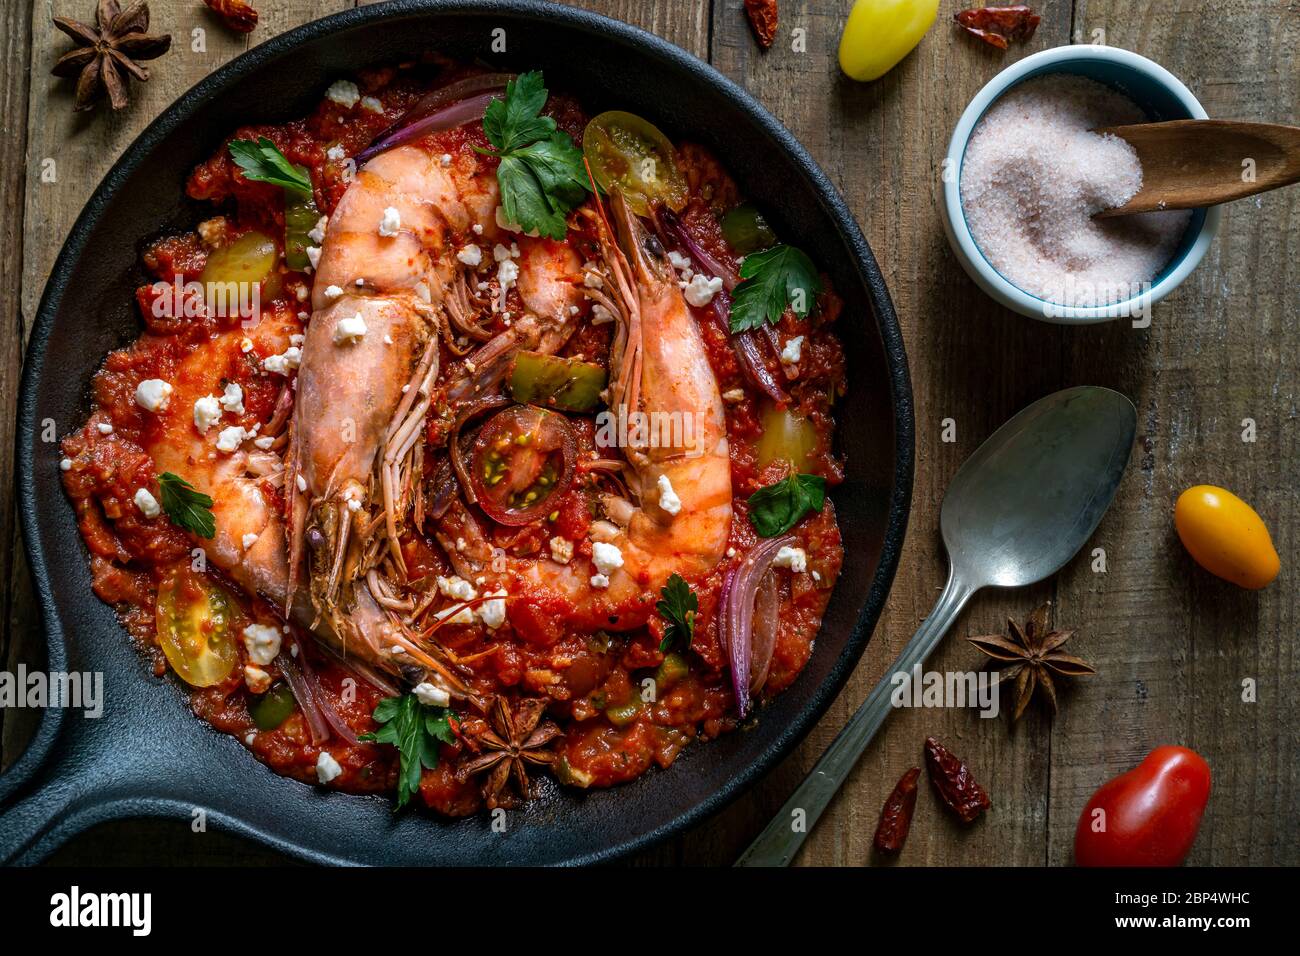 Prawns cooked in cast iron pan with red tomato sauce with parsley and feta cheese. Stock Photo